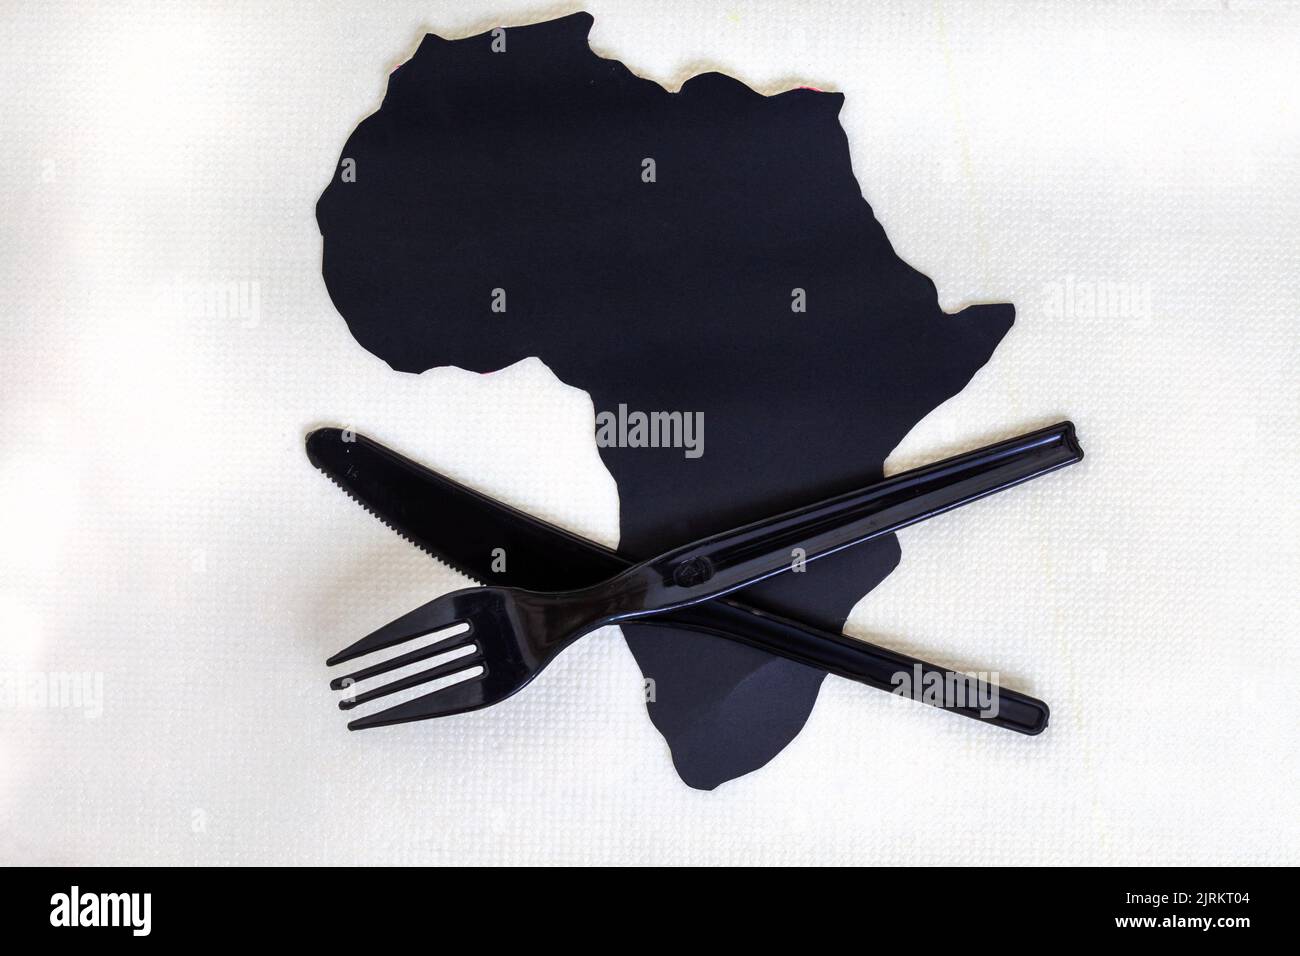 black cut out of Africa continent on white with plastic cutlery and copy space Stock Photo